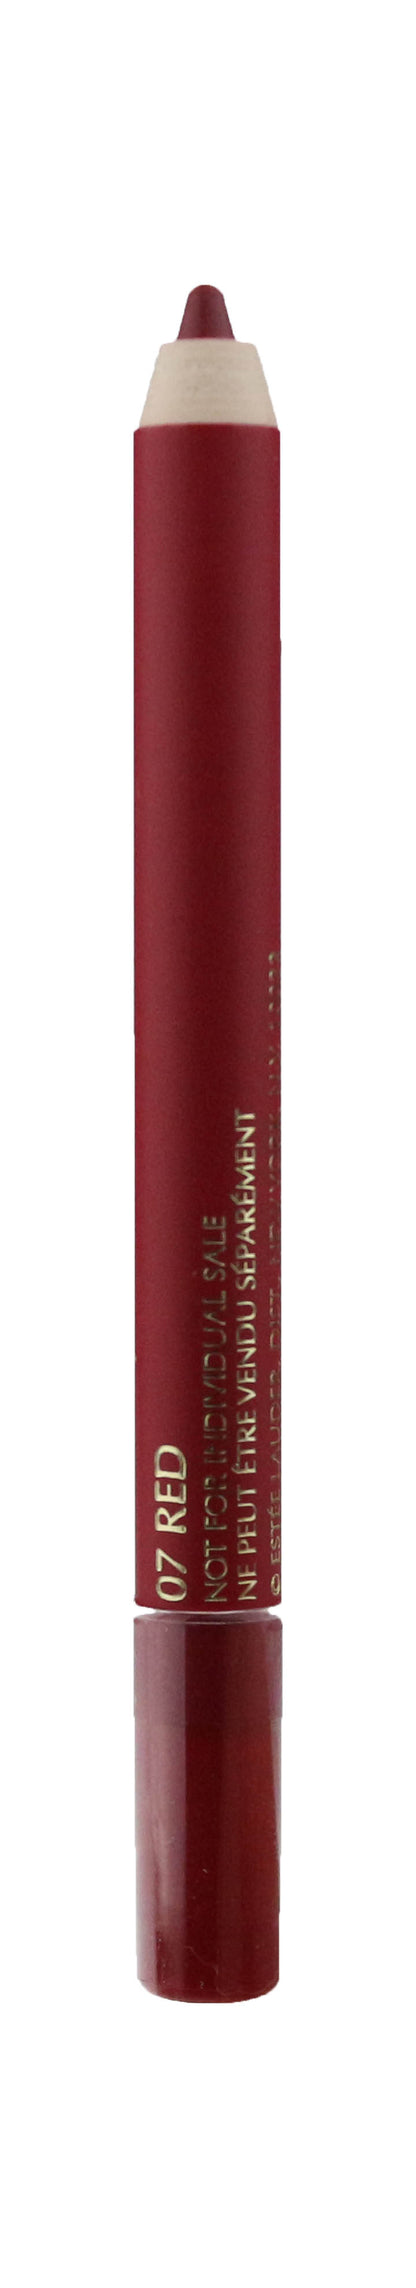 Estee Lauder Double Wear Stay-in-Place Lip Pencil '07 Red' 0.04Oz Travel Size